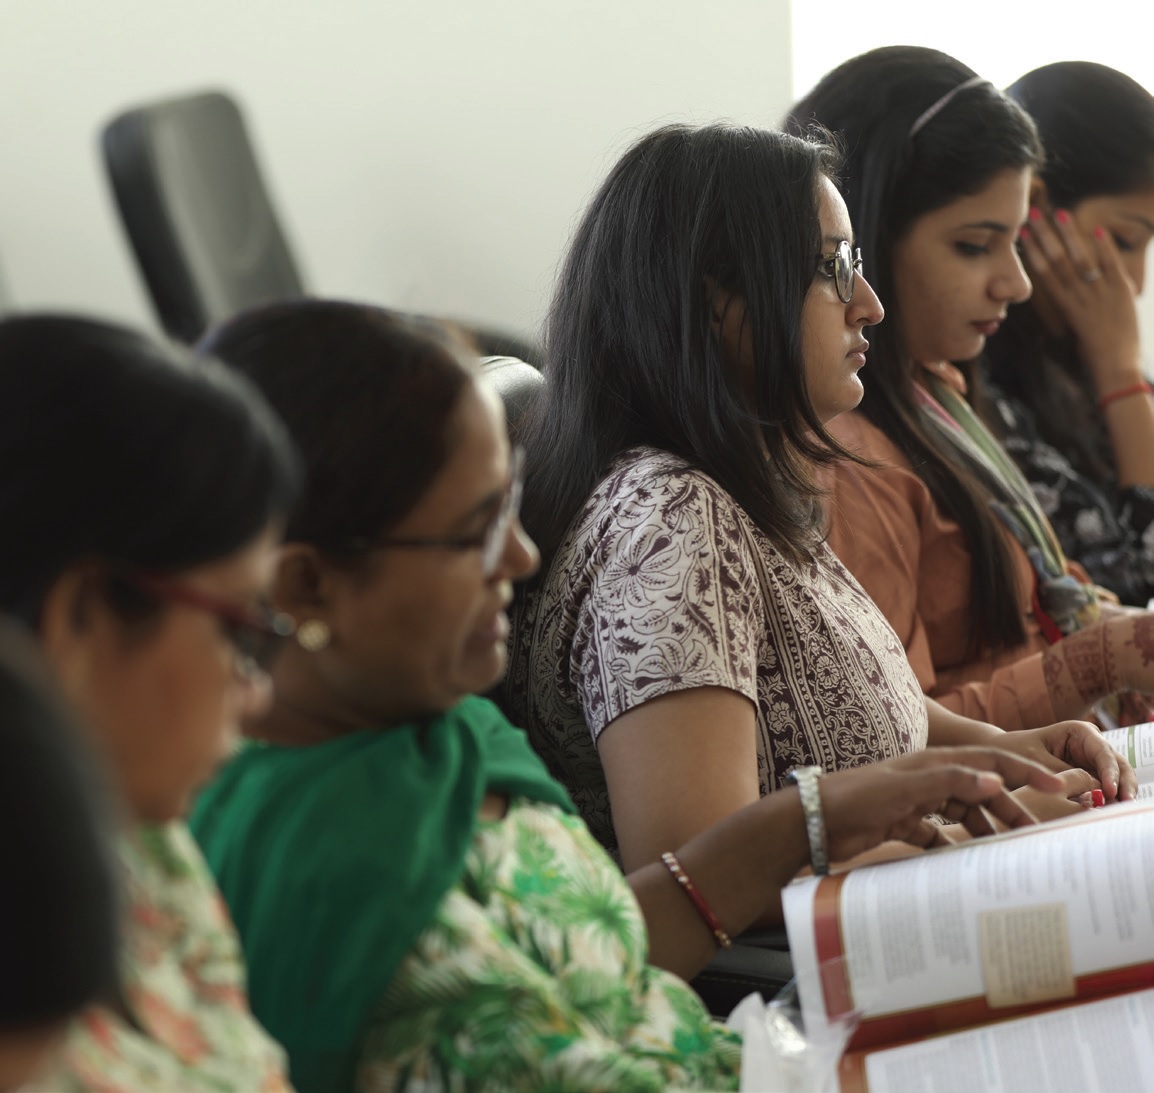 Young people in India learn about gender equity in an effort to reduce the rate of gender-based violence.